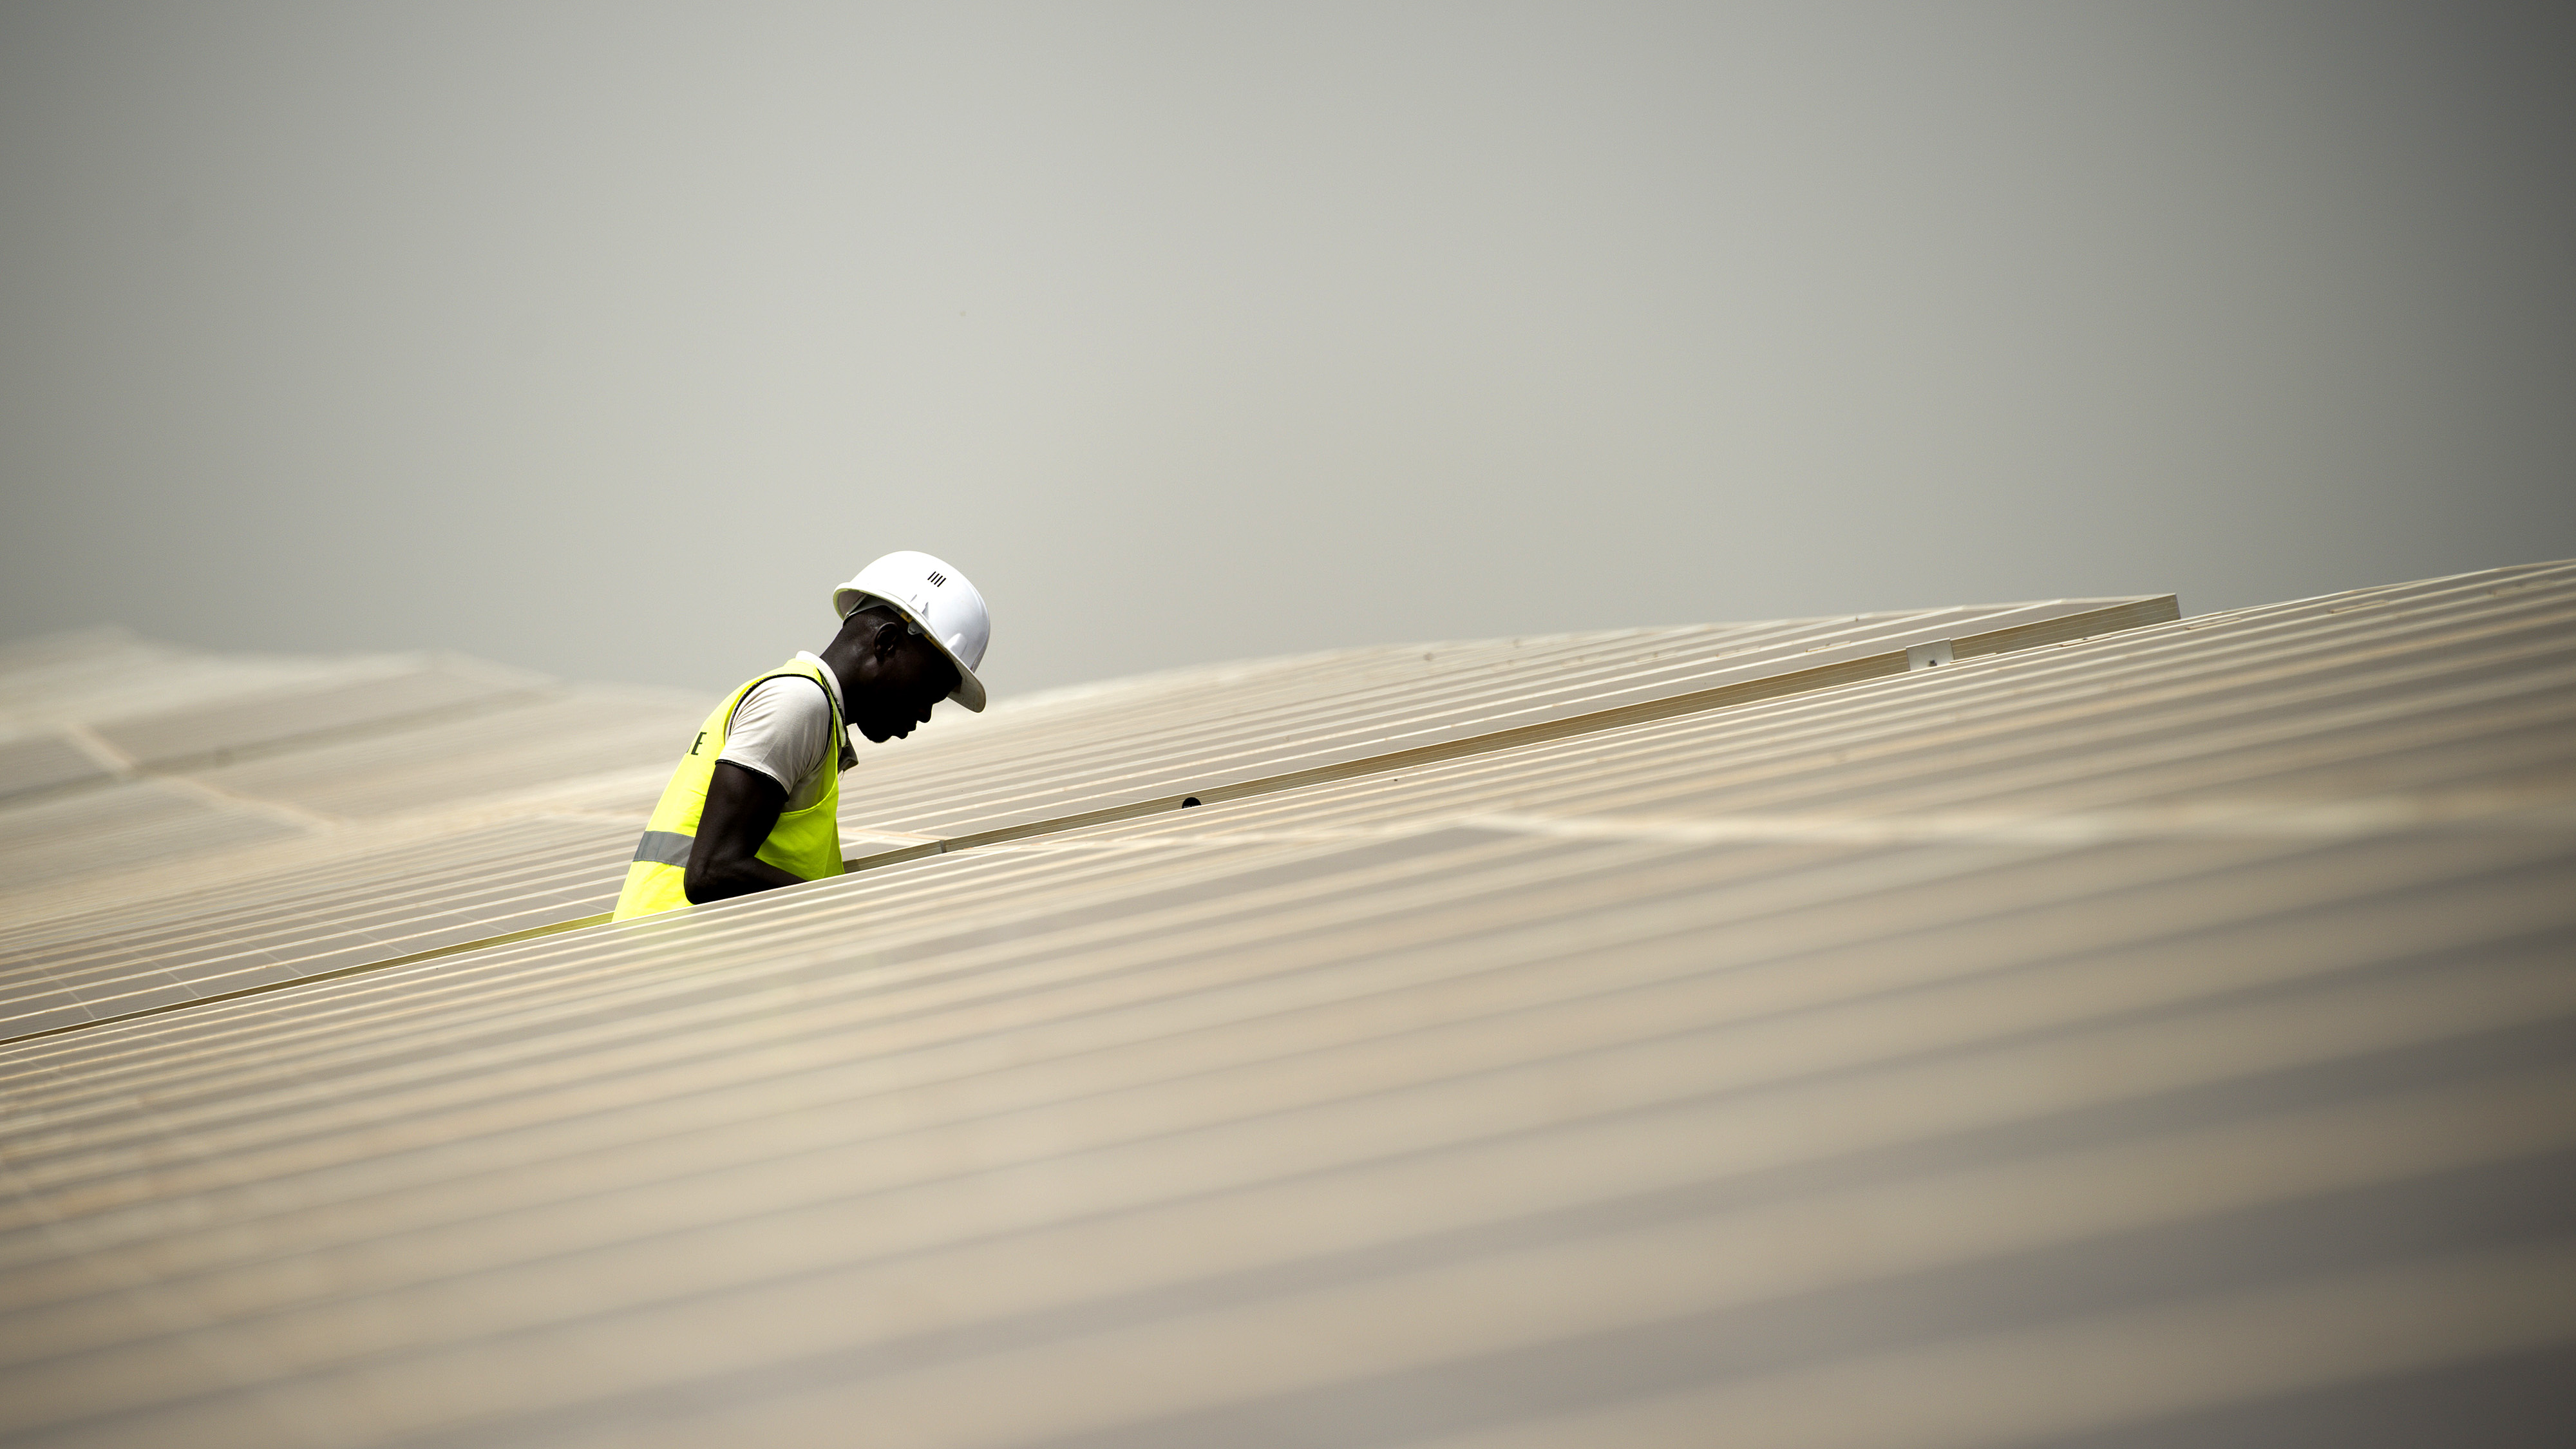 A worker inspects photovoltaic solar panels in an array at the Senergy Santhiou Mekhe PV solar plant in Thies, Senegal. /Getty